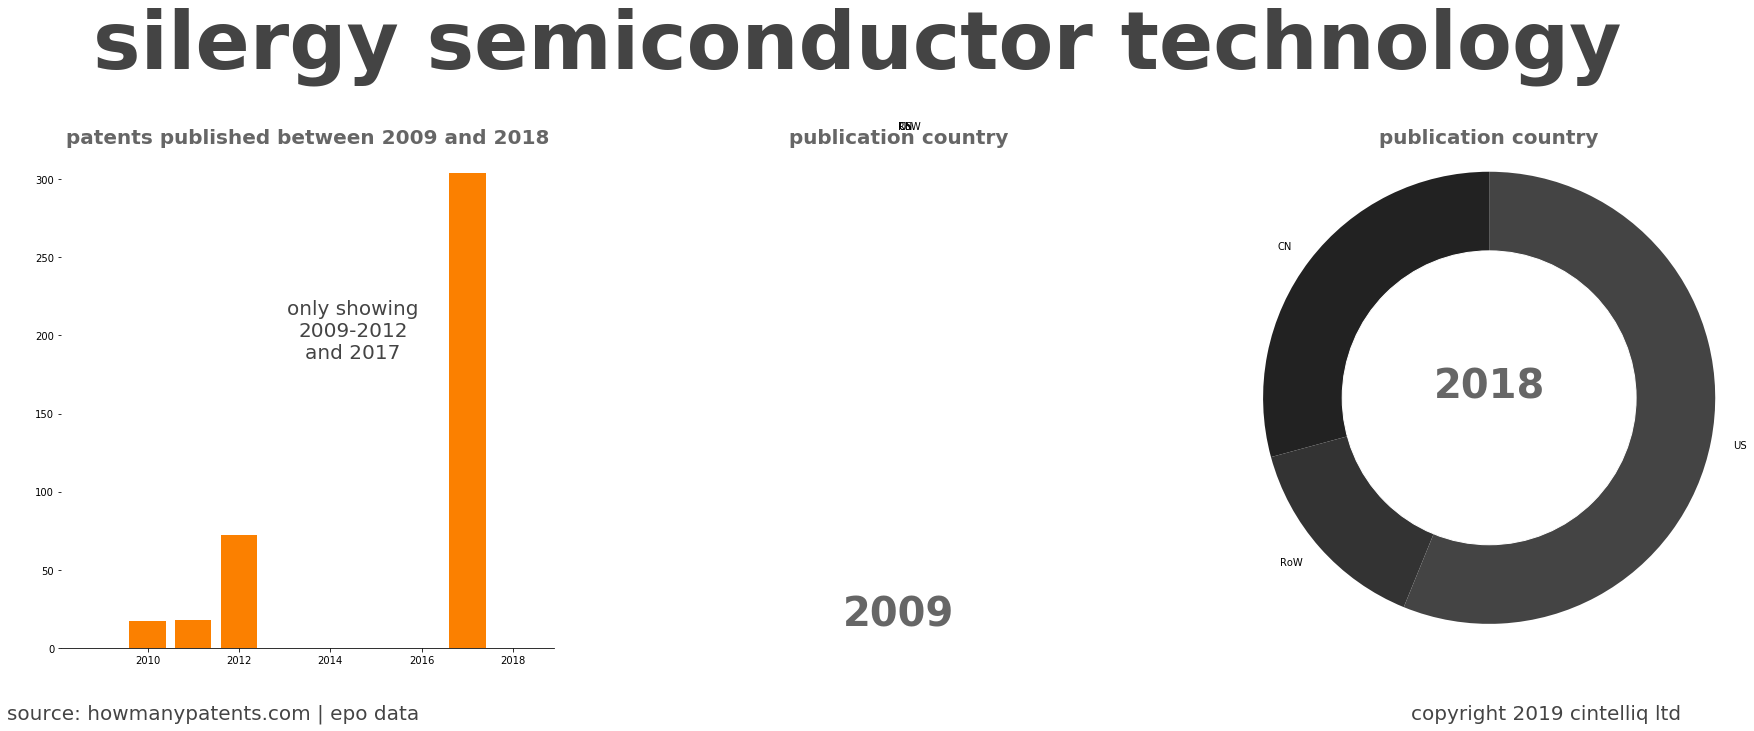 summary of patents for Silergy Semiconductor Technology 